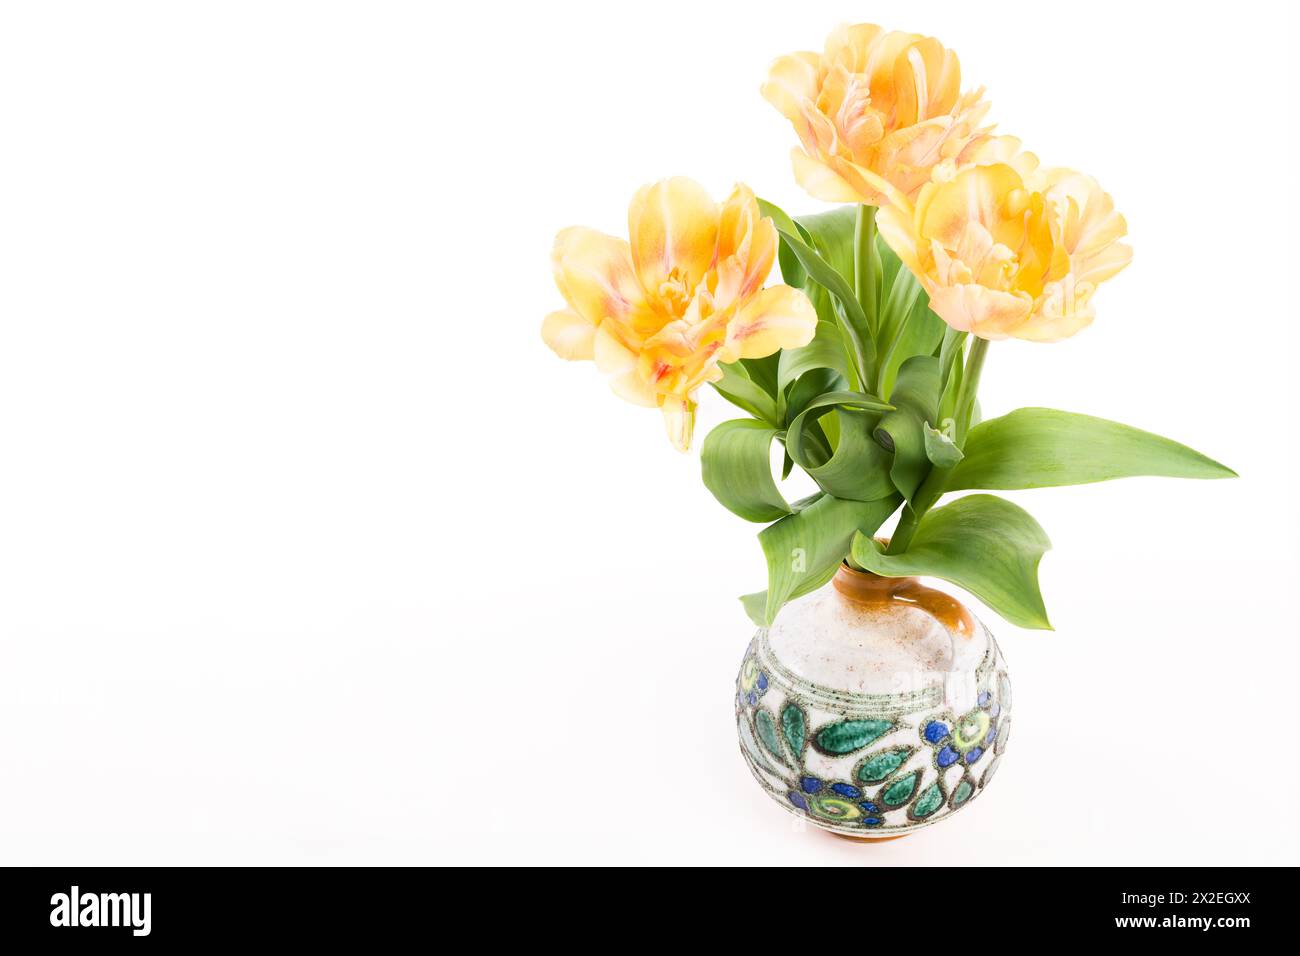 Double soft yellow tulips in a vase on a white background. Spring tulips bouquet isolated. Stock Photo